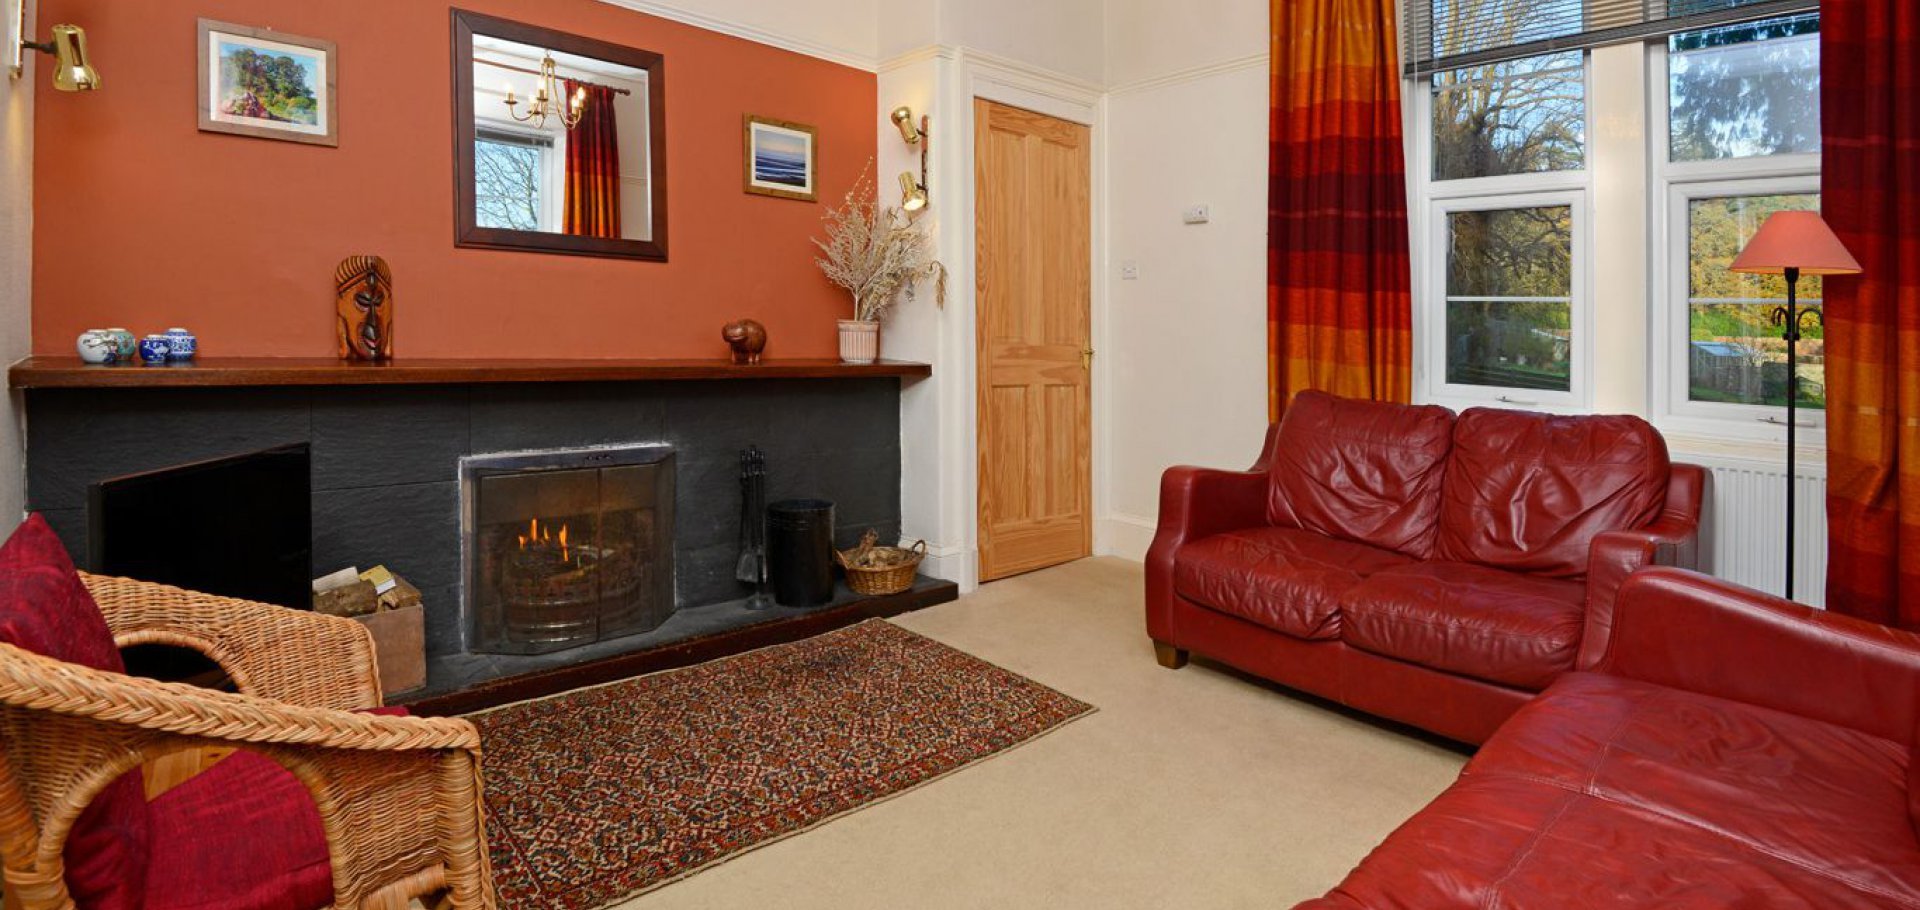 Sitting room at the Lodge self catering holiday accommodation near castle douglas in dumfries and galloway